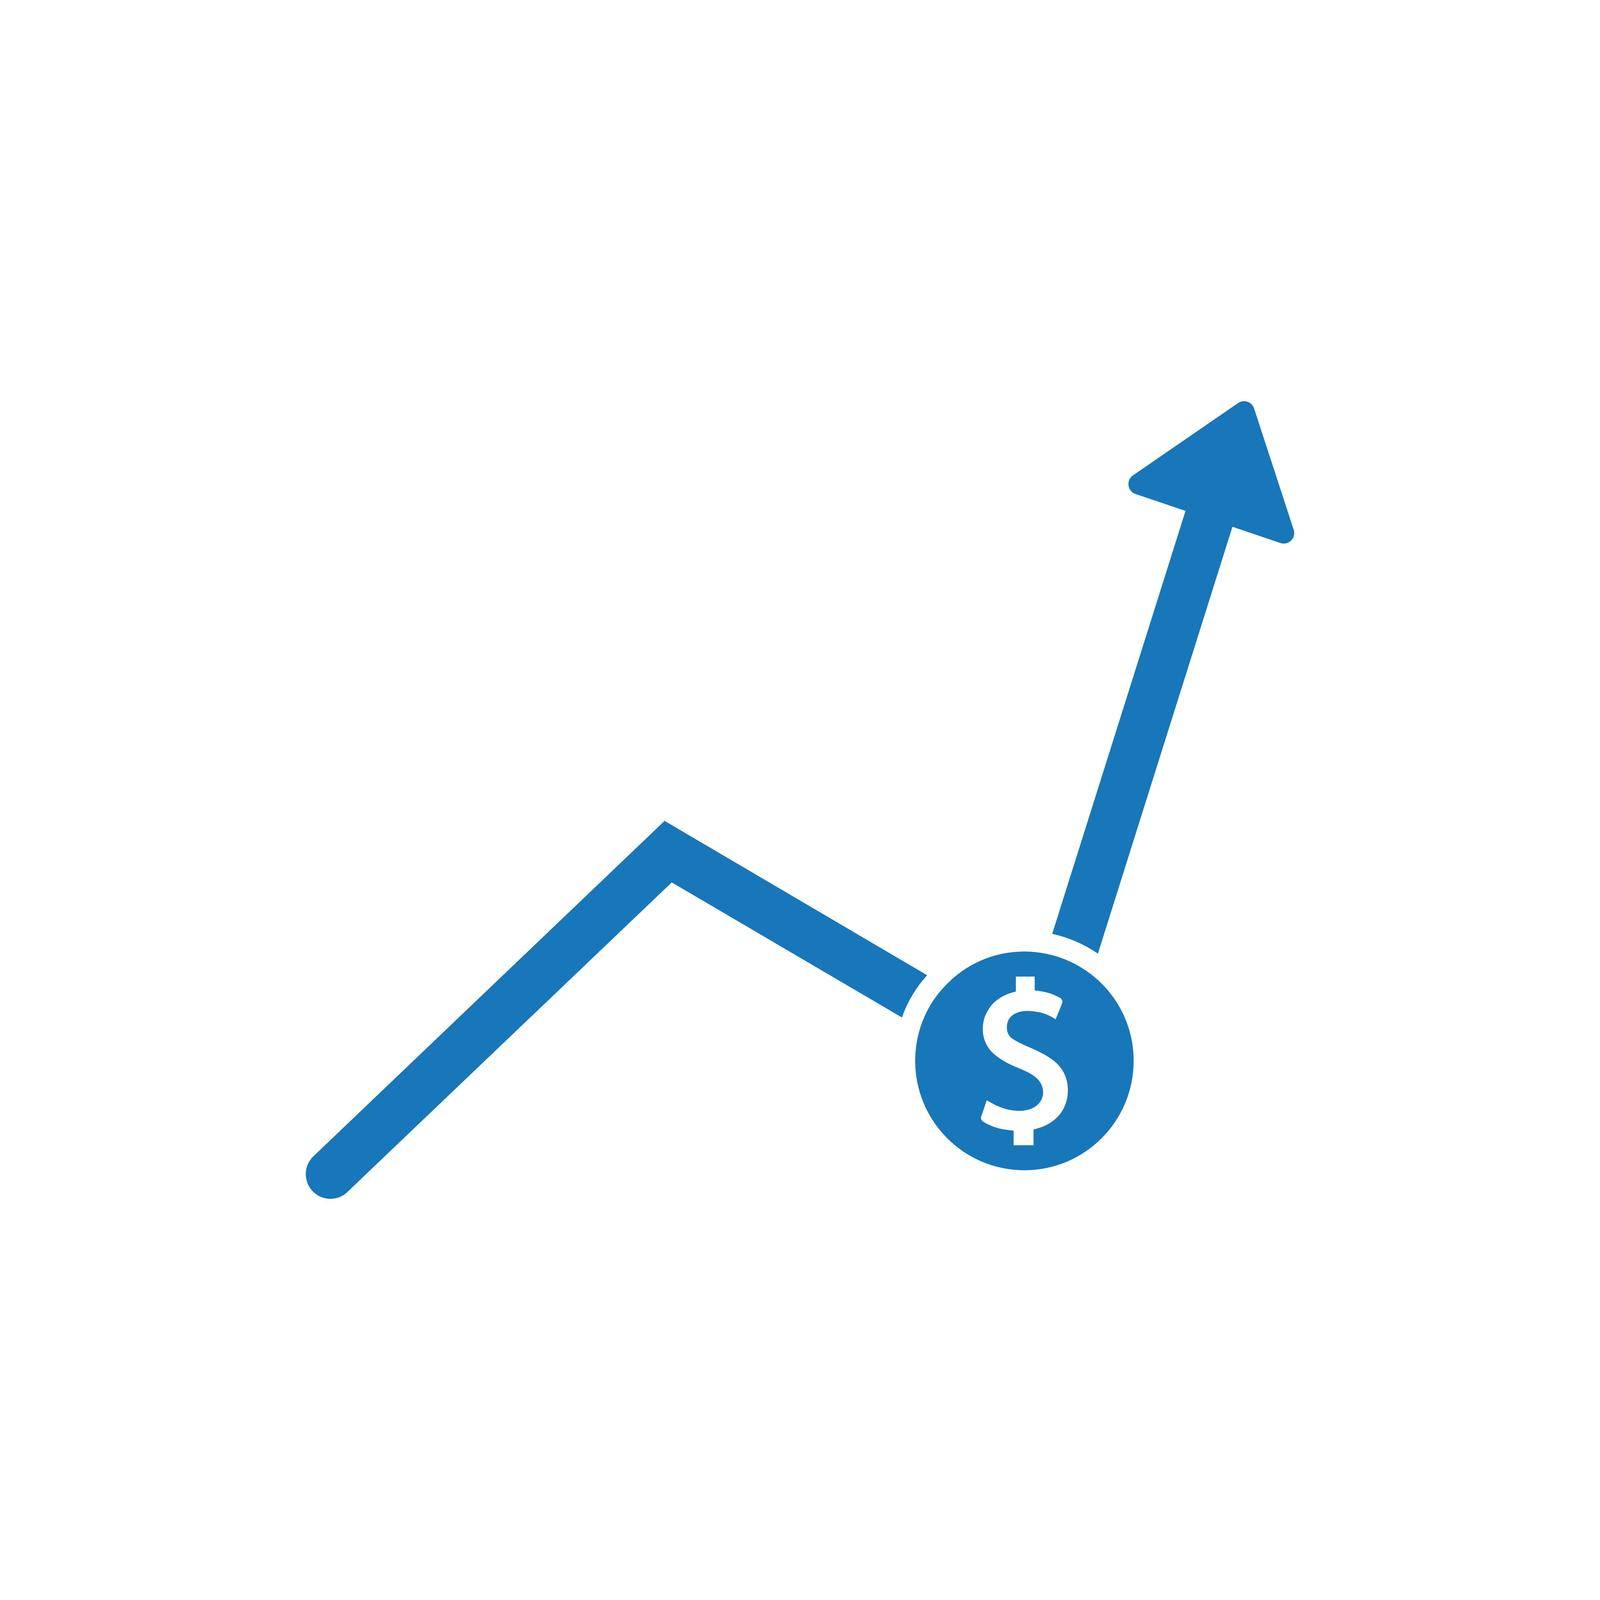 Financial Growth icon. Vector EPS file.